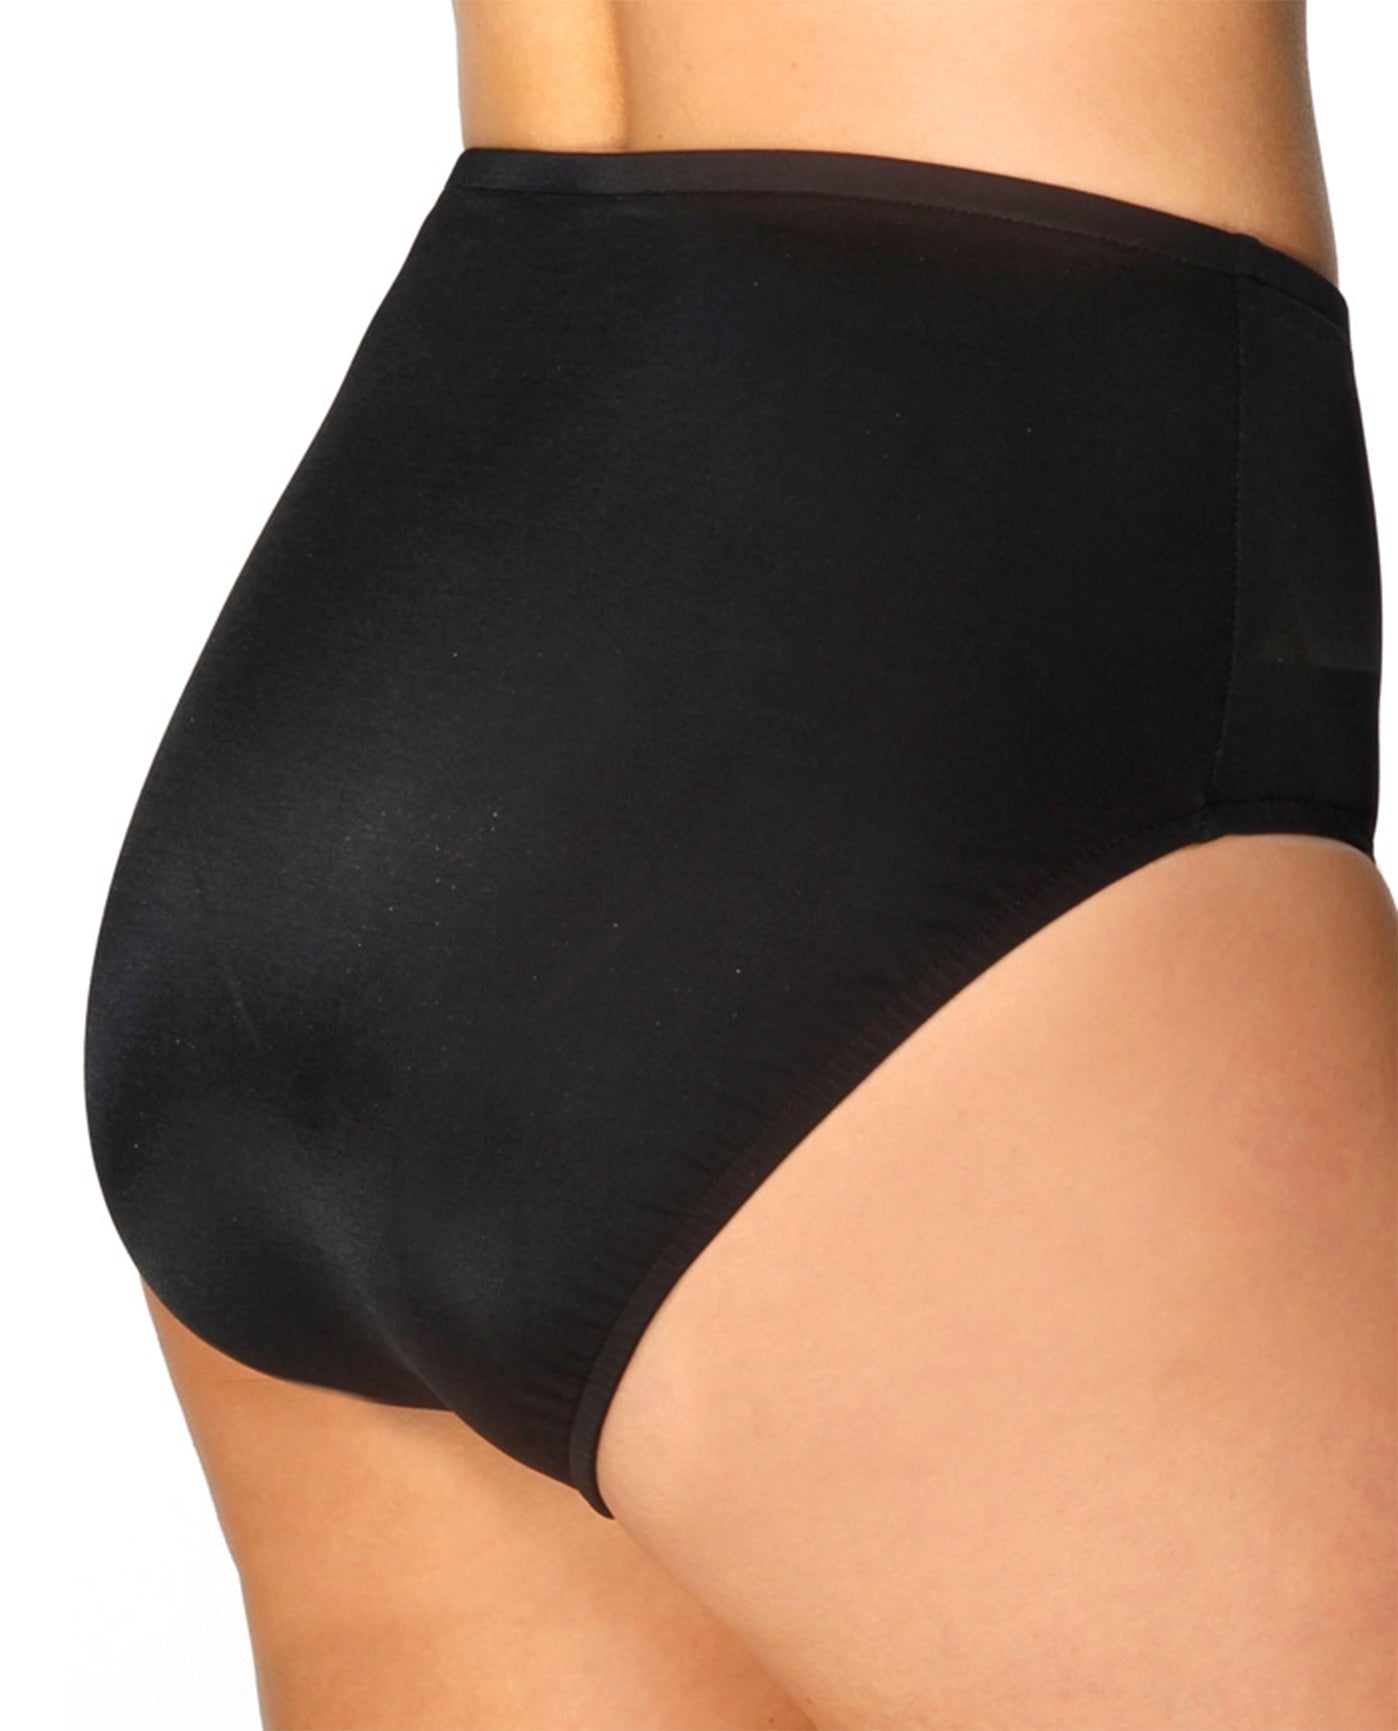 Back View Of Miraclesuit Black Classic Brief Tankini Bottom | MIR Black